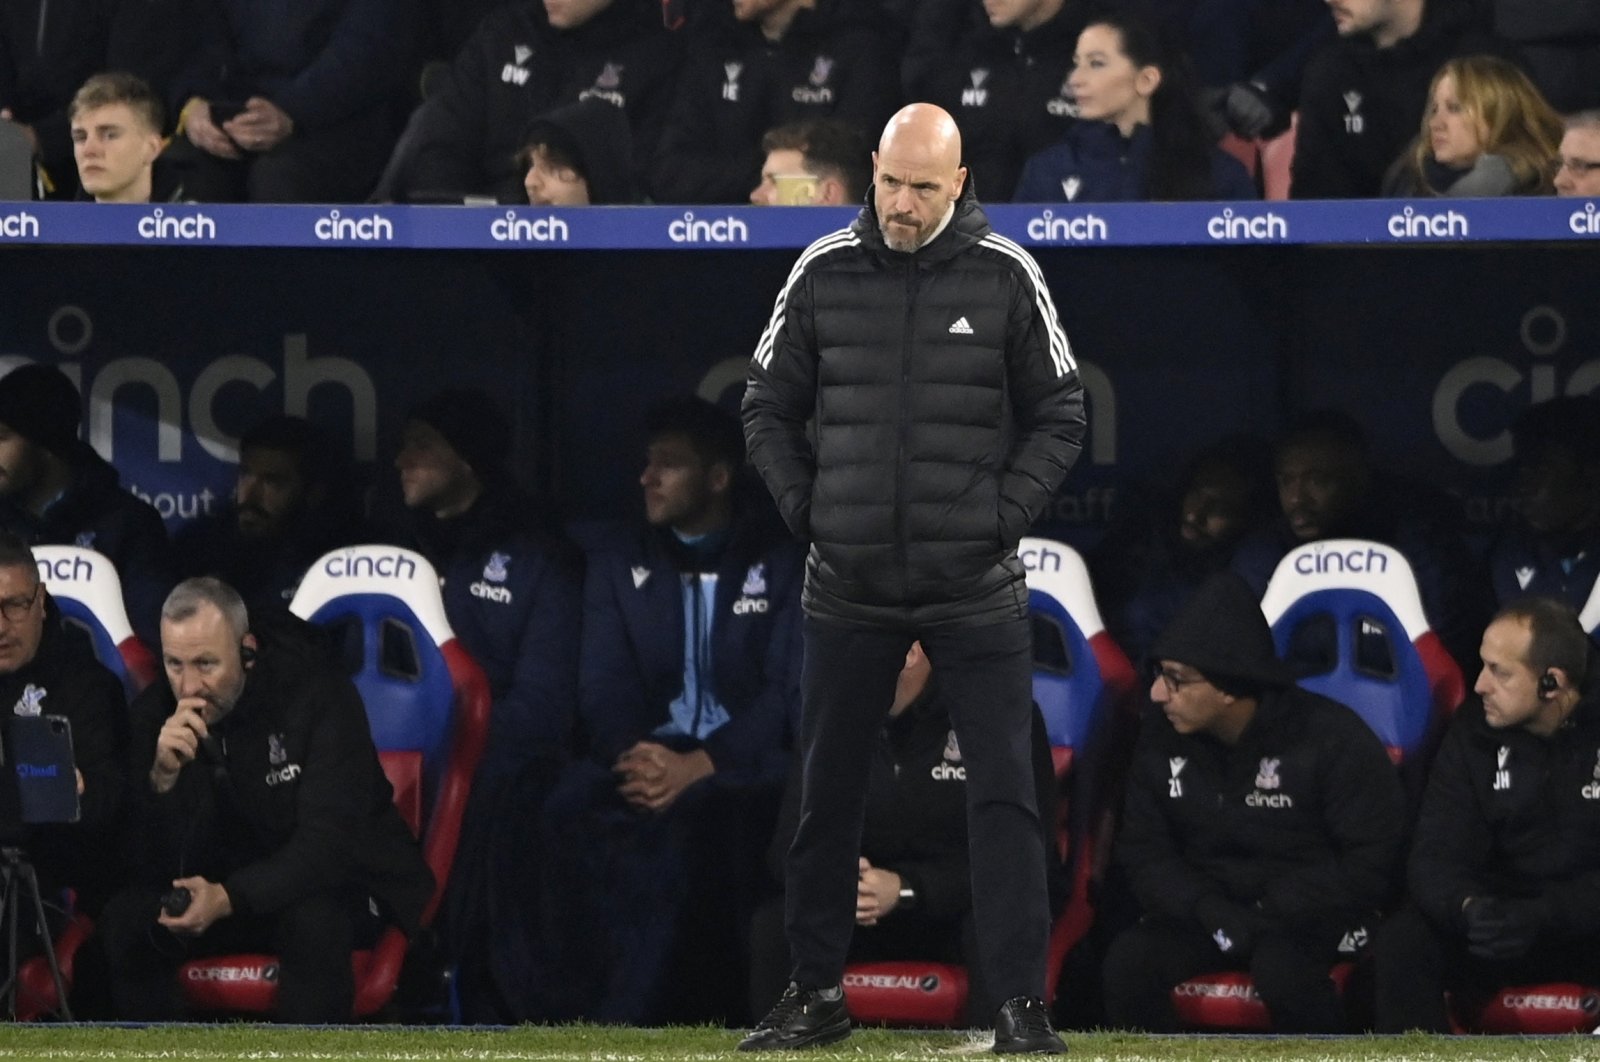 Manchester United manager Erik ten Hag shows disappointment during the match against Crystal Palace at Selhurst Park, London, U.K., Jan. 18, 2023. (Reuters Photo)